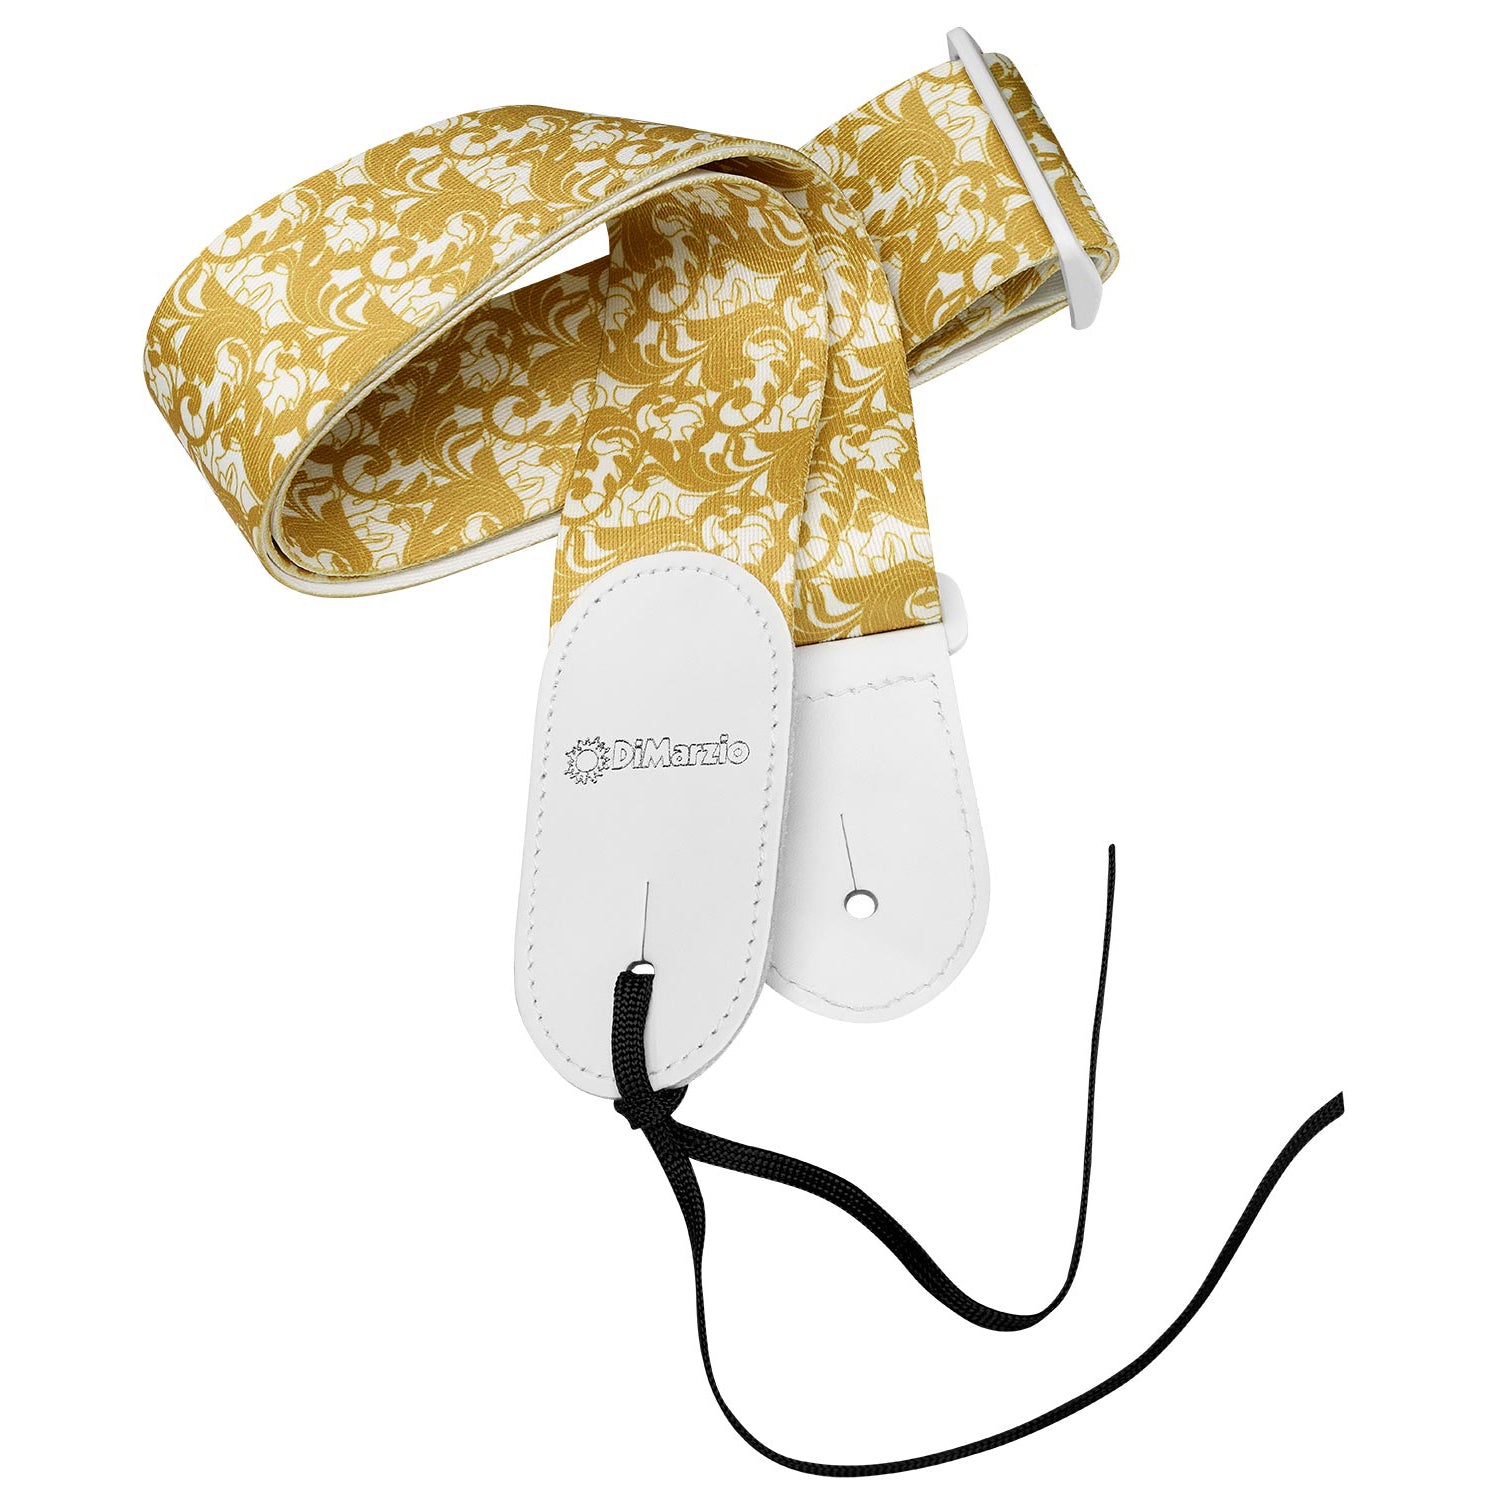 Image of a guitar strap against white background. the guitar strap has black at the bottom where it attaches to the guitar and in white says "DiMarzio". the strap is white and gold with a leafy swirled pattern.